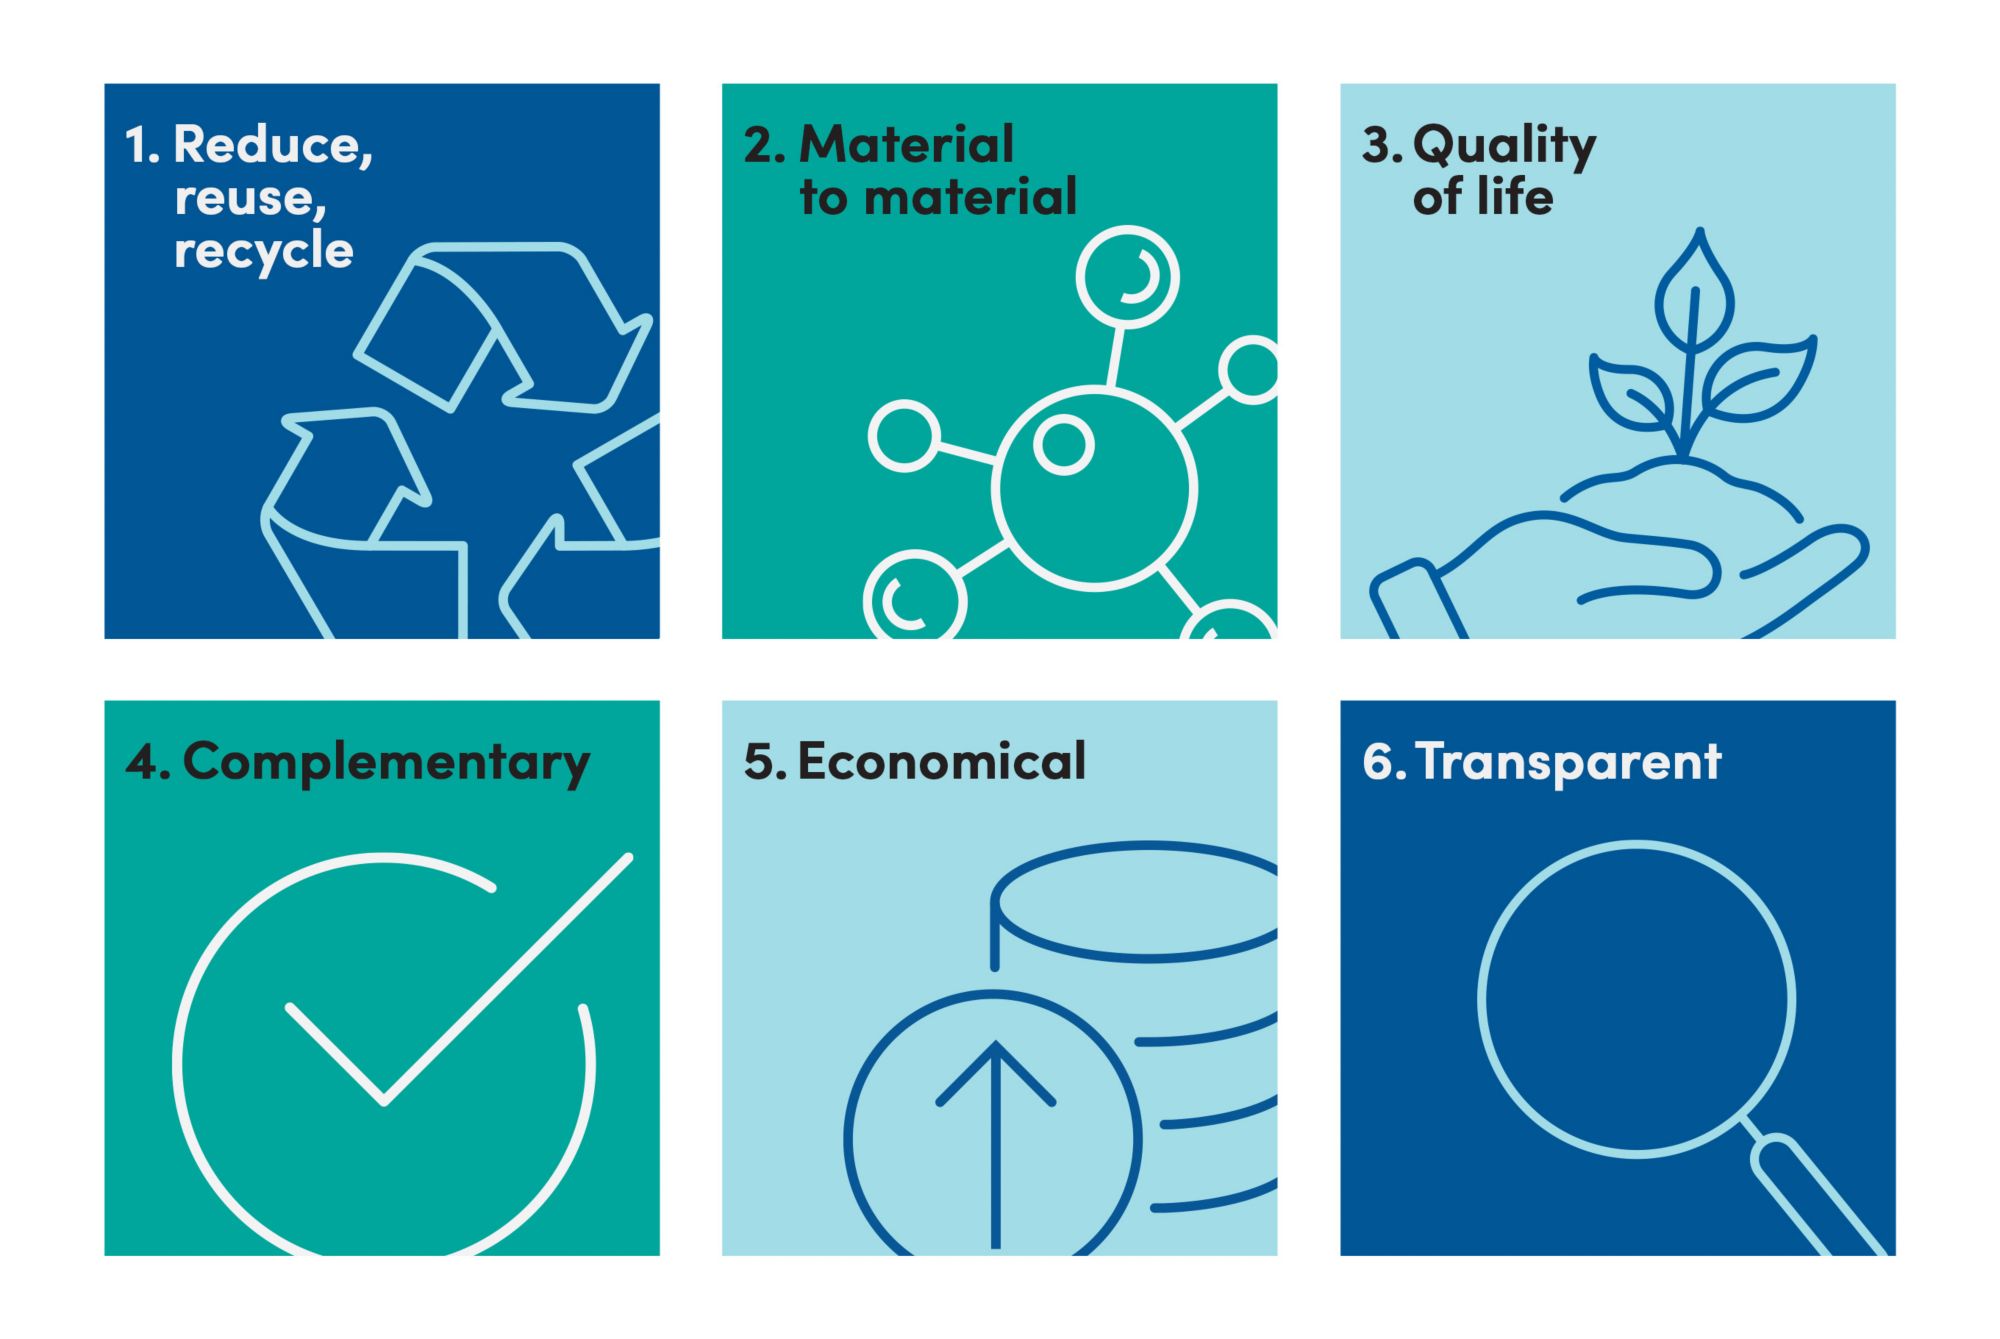 Icons of the six principles of circular economy: Reduce, reuse, recycle; material to material; quality of life; complementary; economical; and transparent. 